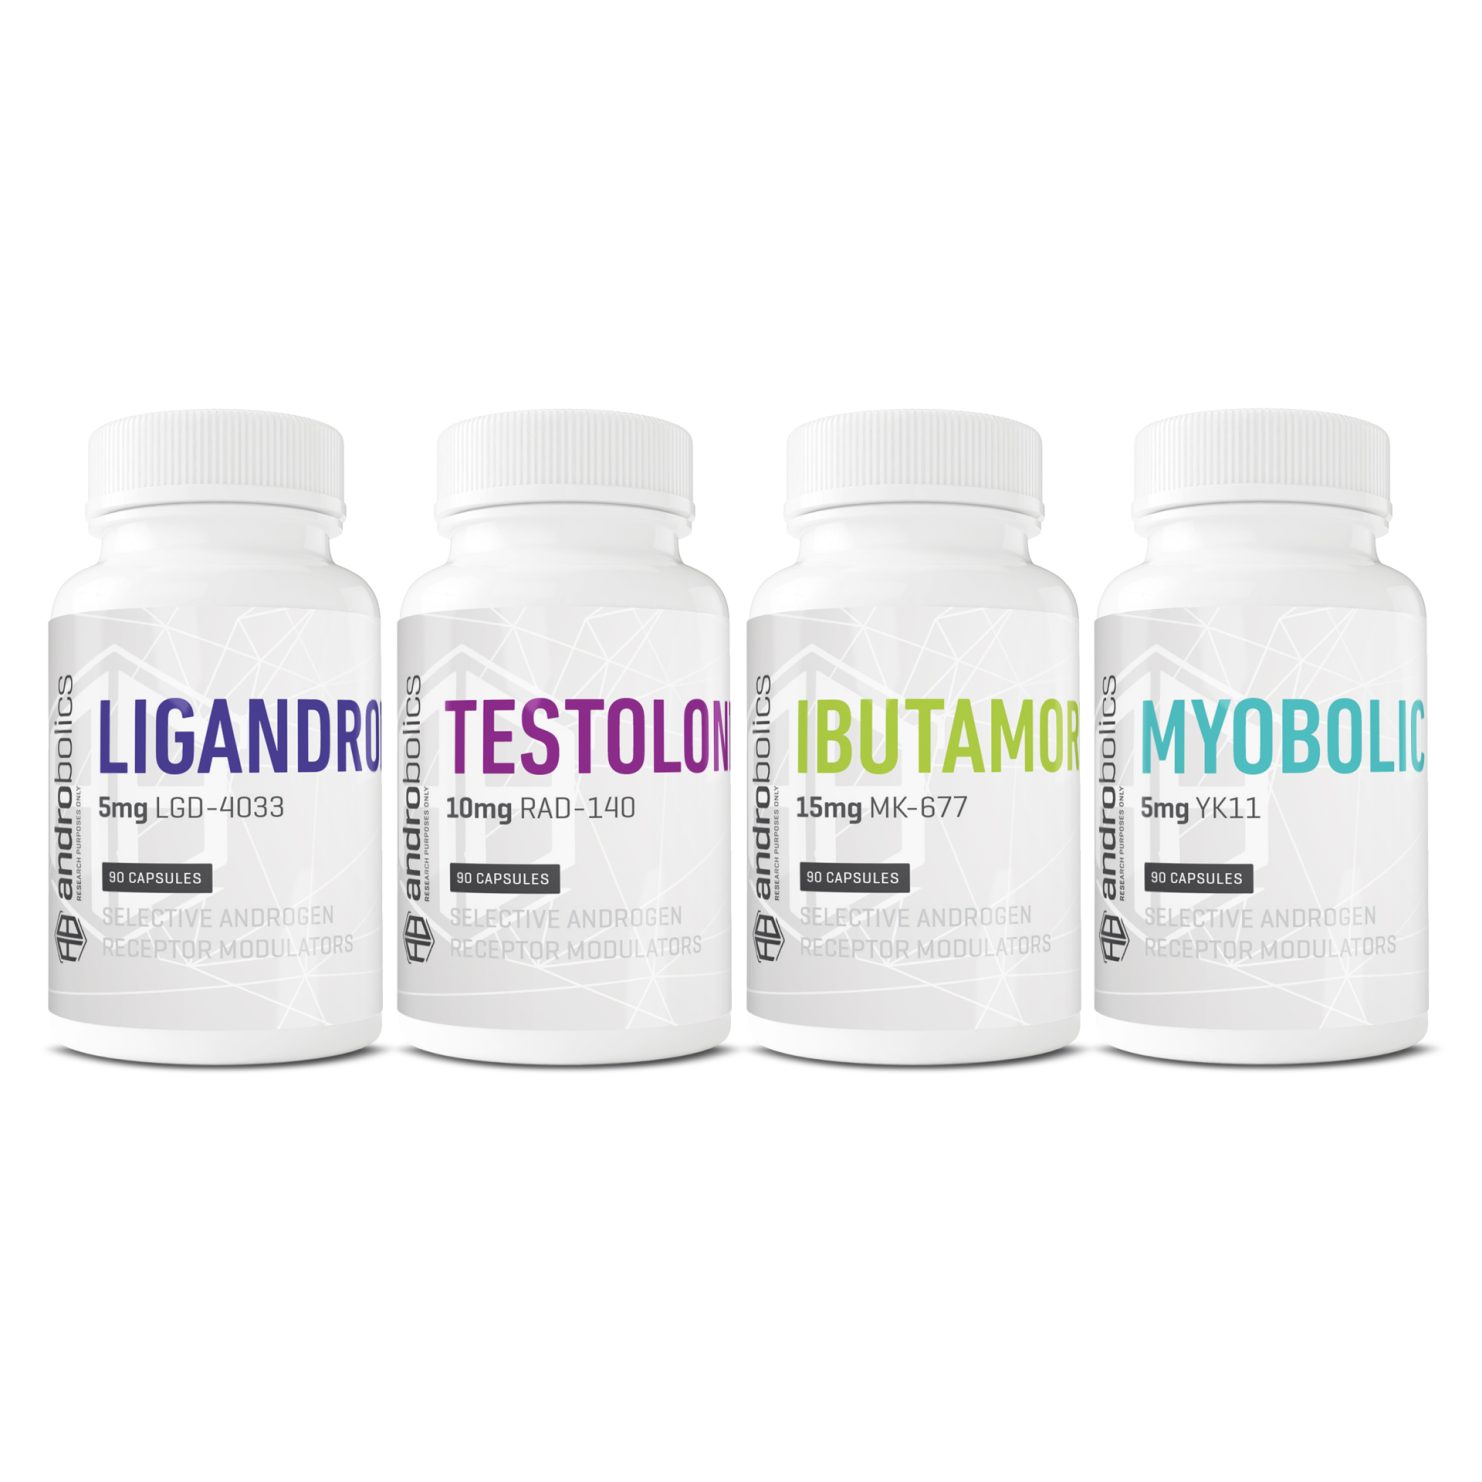 Ultimate Muscle Mass SARMs Stack with Ligandrol, Ibutamoren, Myobolic, and Testolone bottles from Androbolics.